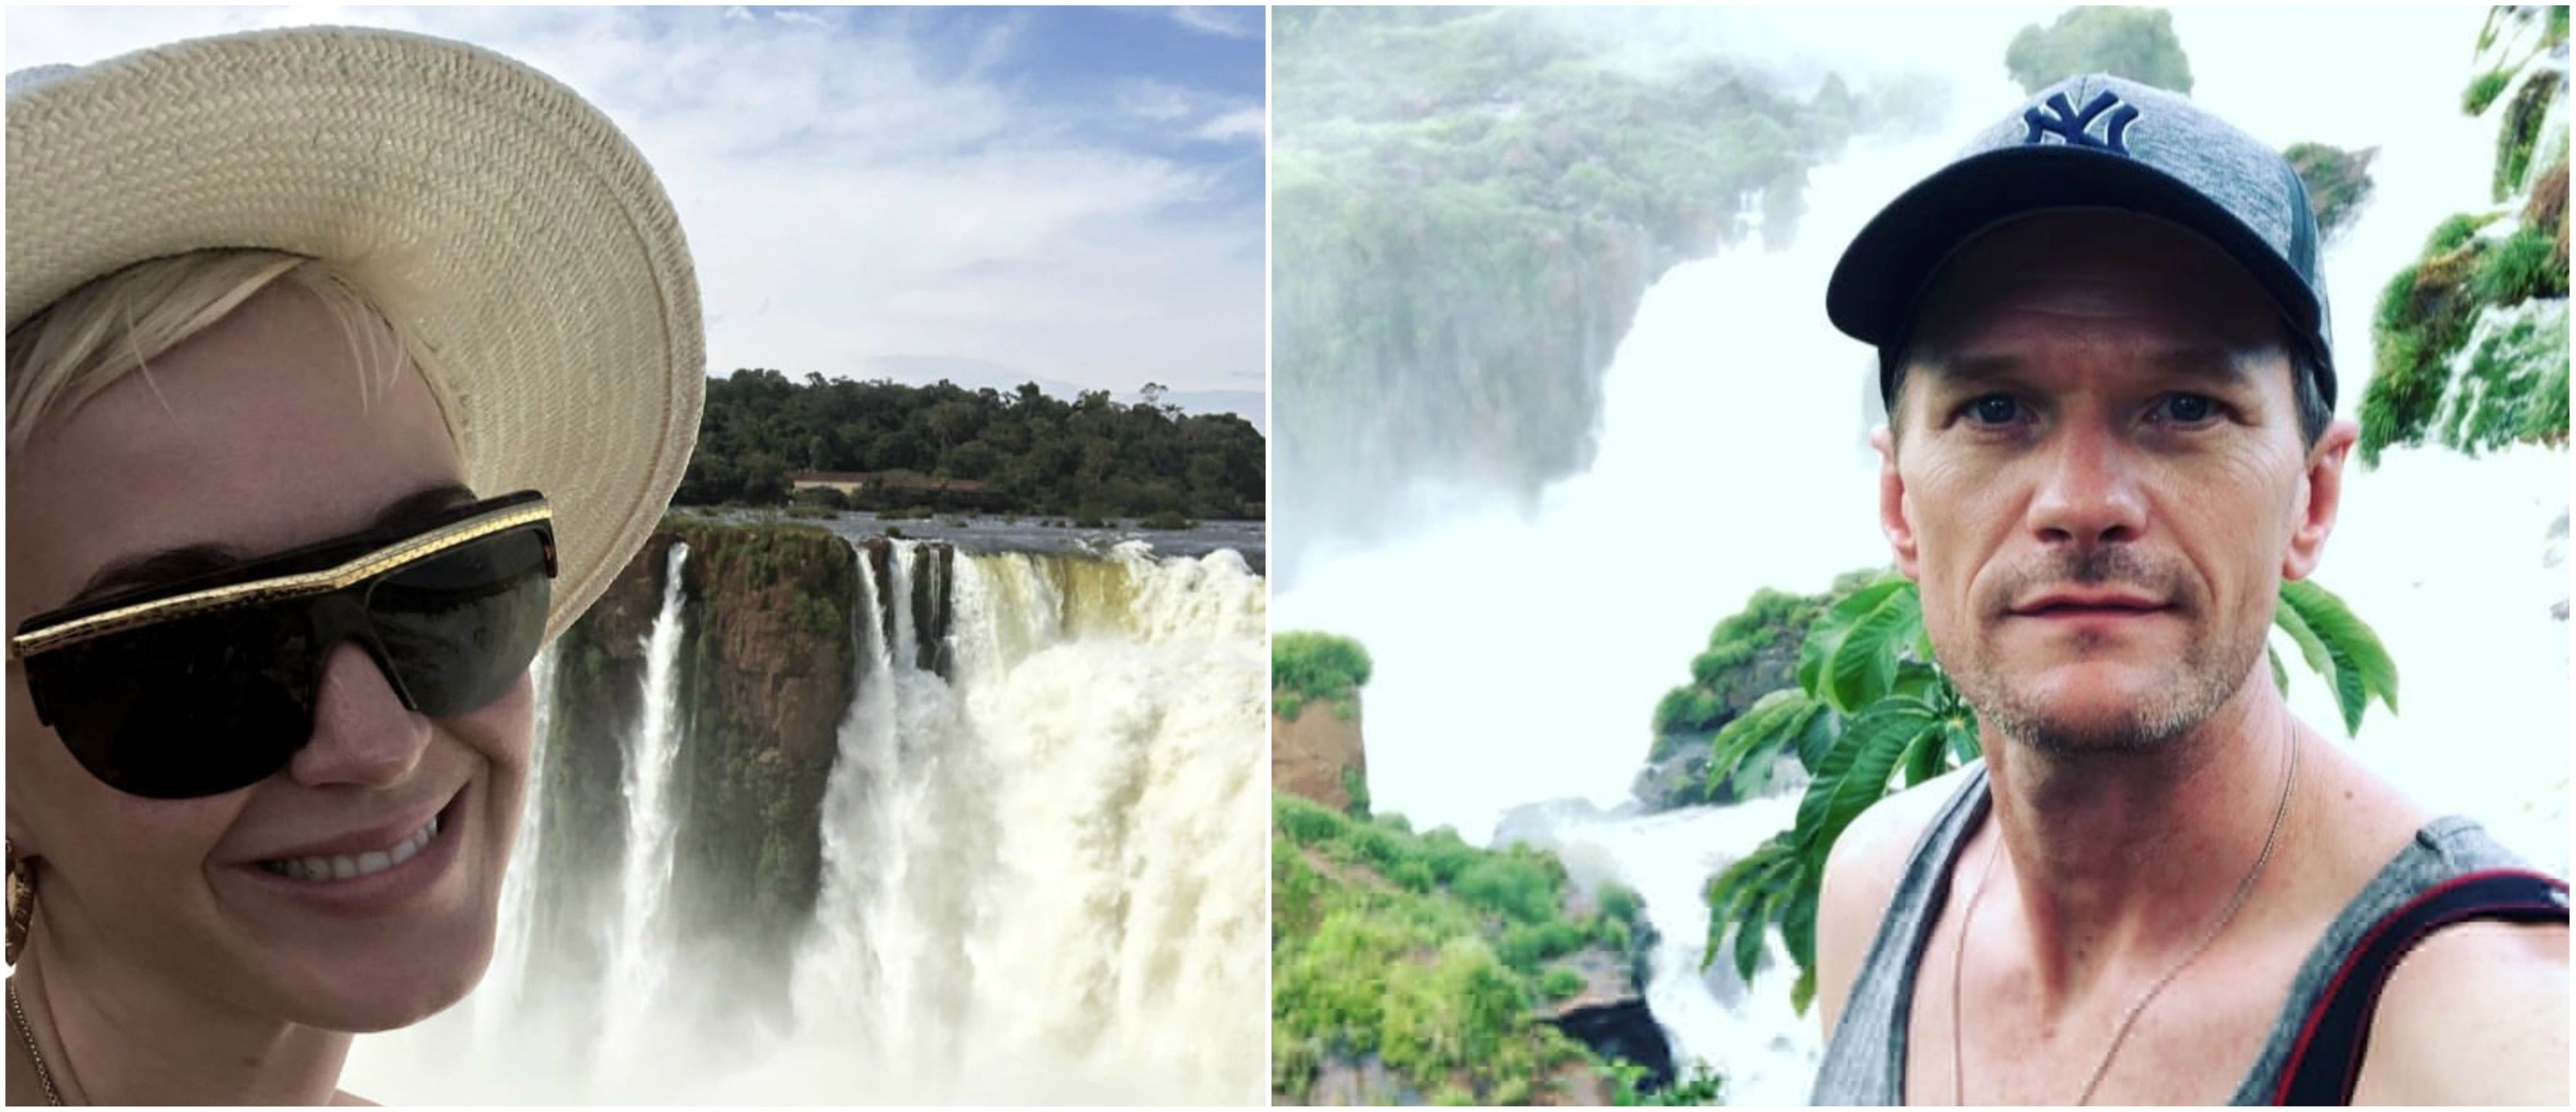 Iguazu Falls in Argentina with Katy Perry and Neil patrick Harris